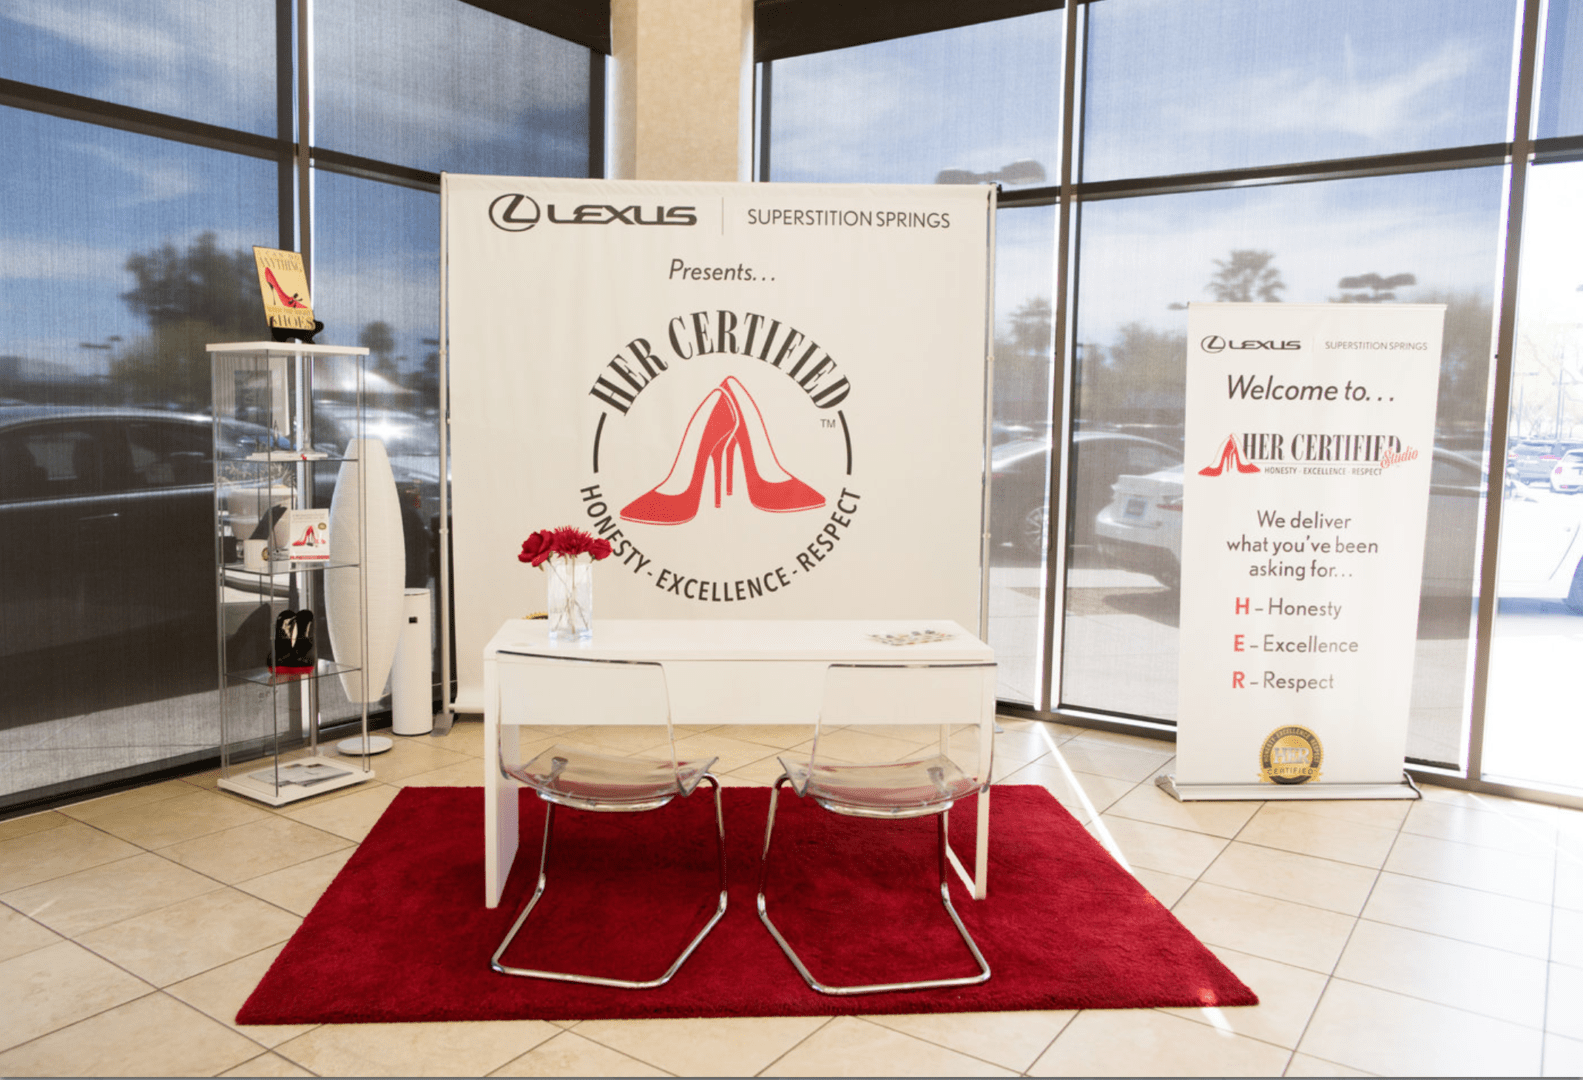 A promotional booth for the "her certified" program by lexus, featuring a banner and information stand, with two chairs on a red carpet in a dealership.